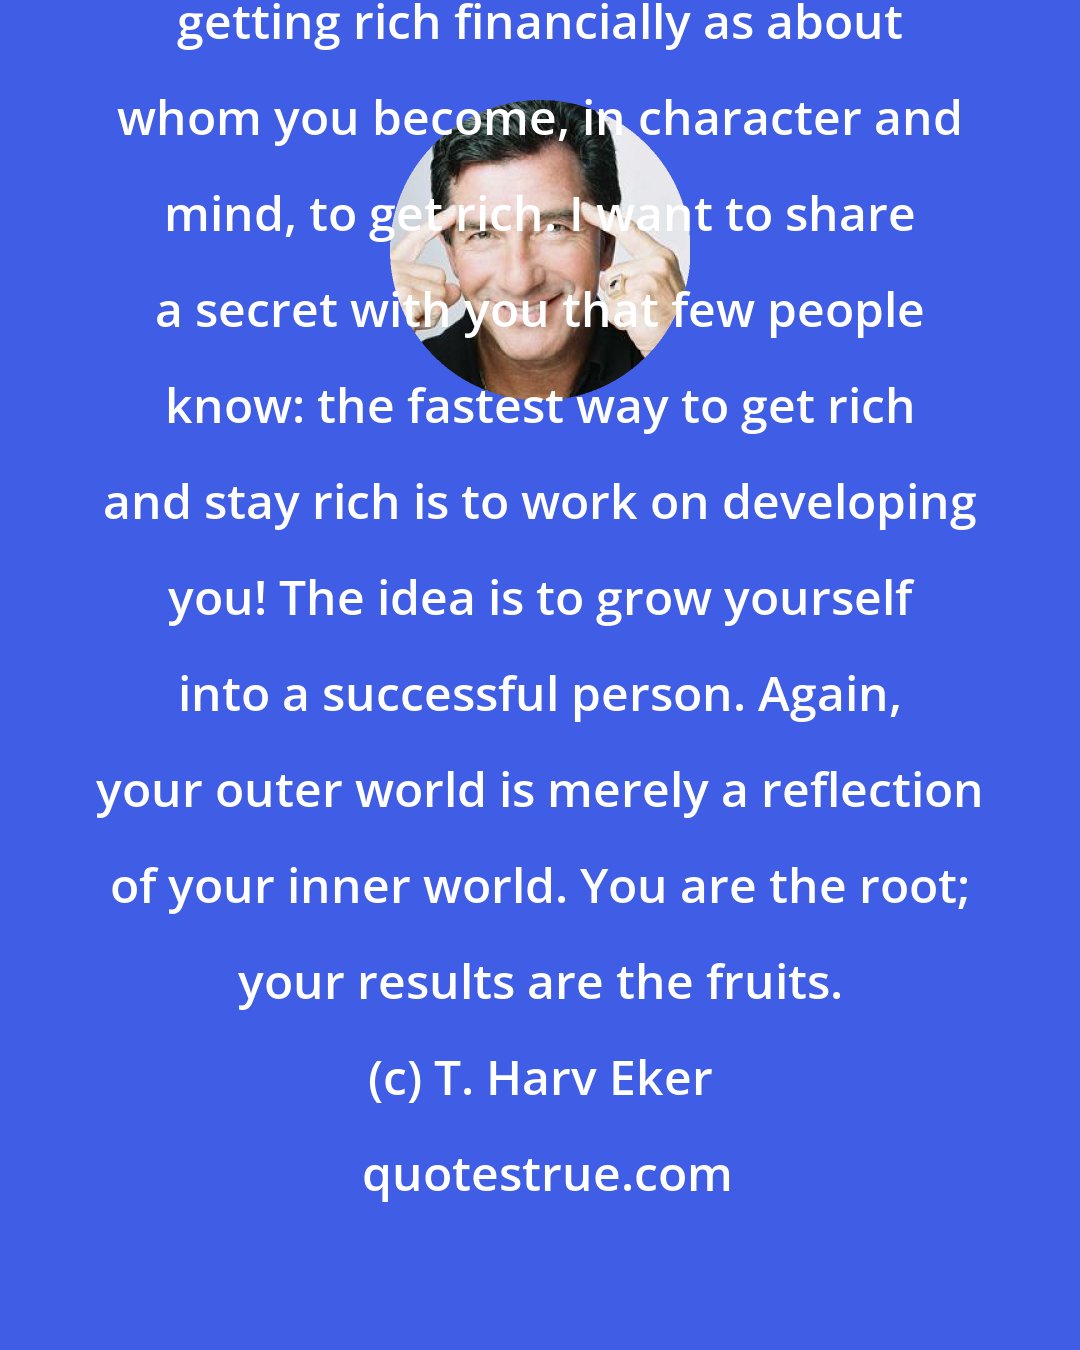 T. Harv Eker: Becoming rich isn't as much about getting rich financially as about whom you become, in character and mind, to get rich. I want to share a secret with you that few people know: the fastest way to get rich and stay rich is to work on developing you! The idea is to grow yourself into a successful person. Again, your outer world is merely a reflection of your inner world. You are the root; your results are the fruits.